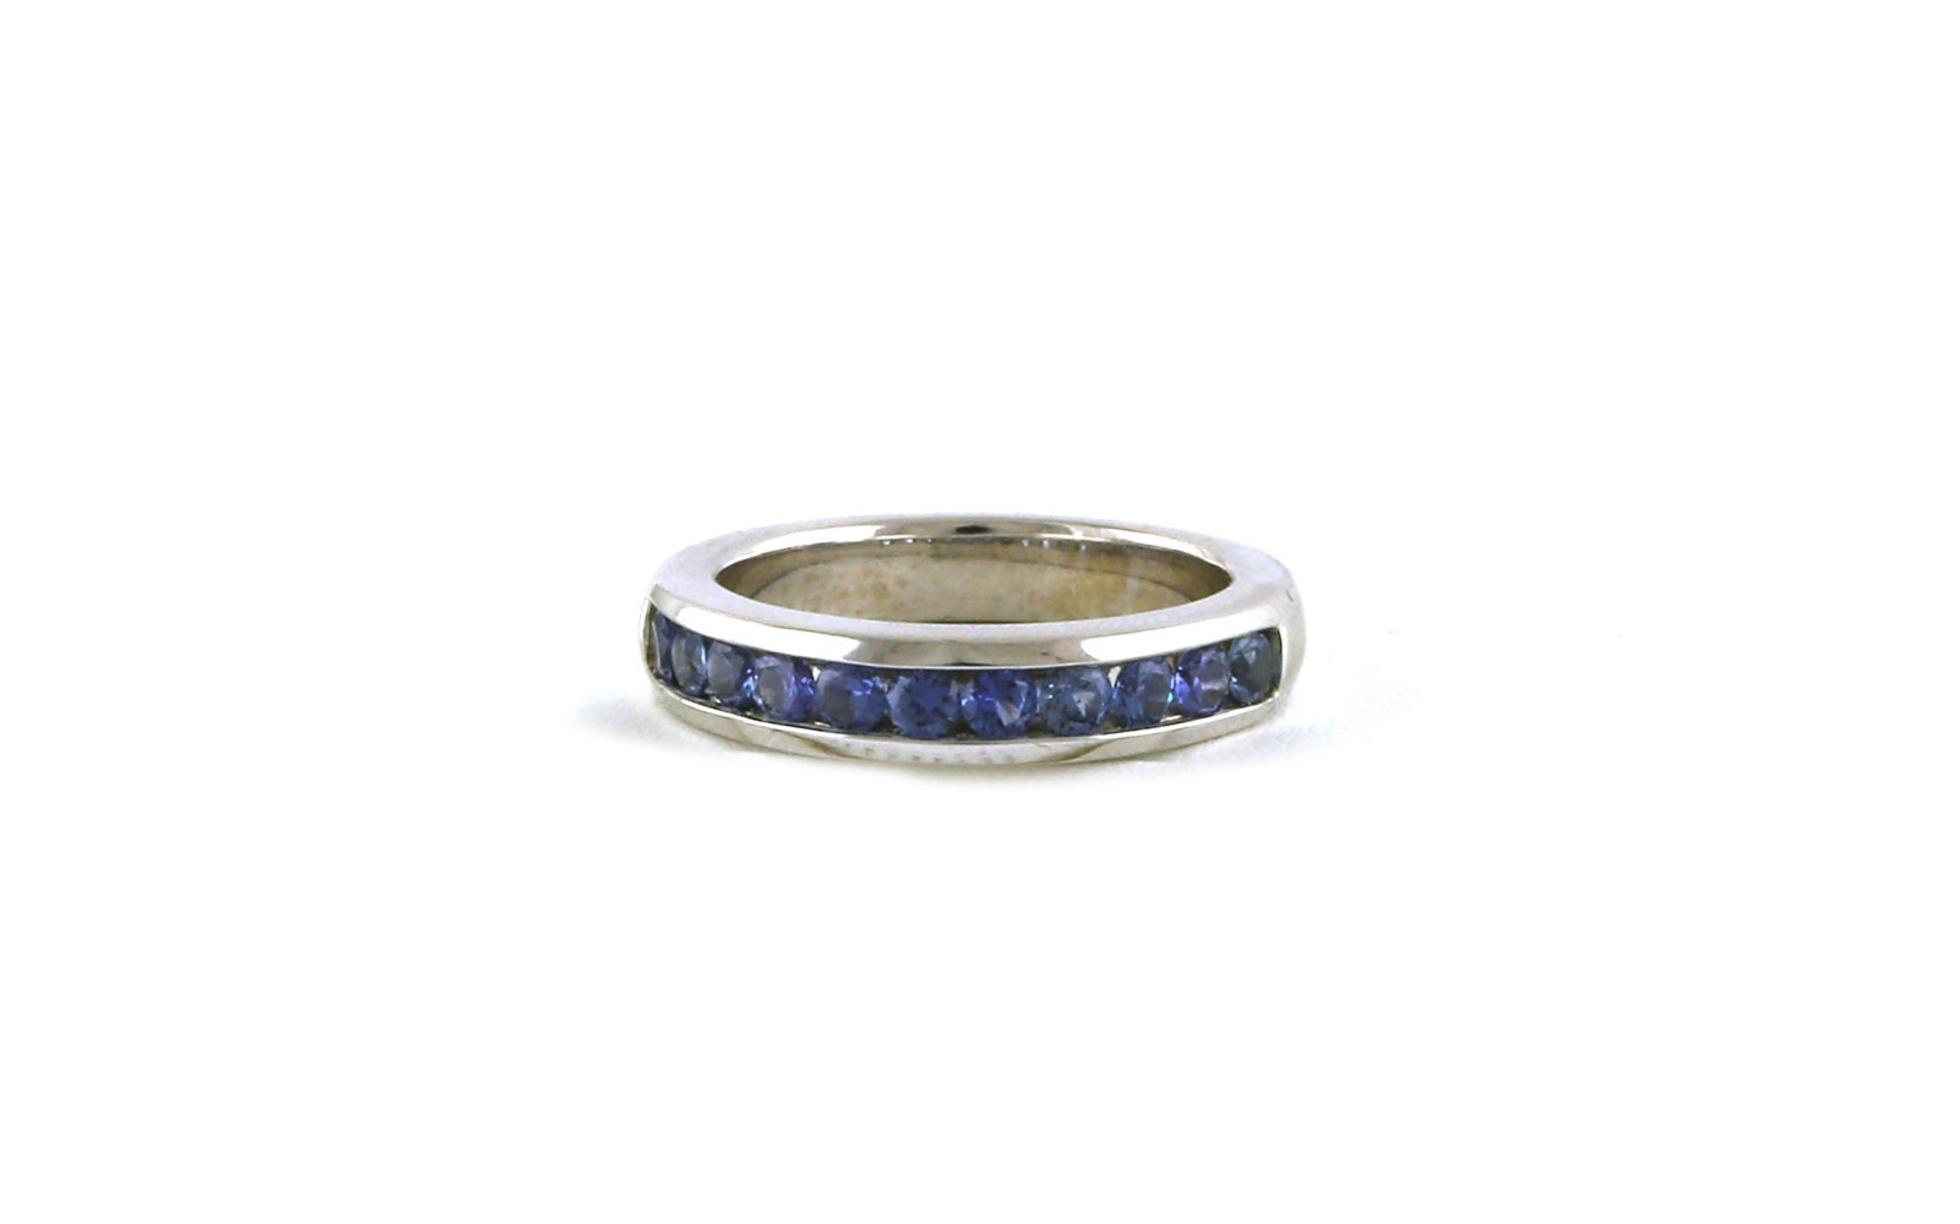 11-Stone Channel-set Montana Yogo Sapphire Band in White Gold (0.82cts TWT)